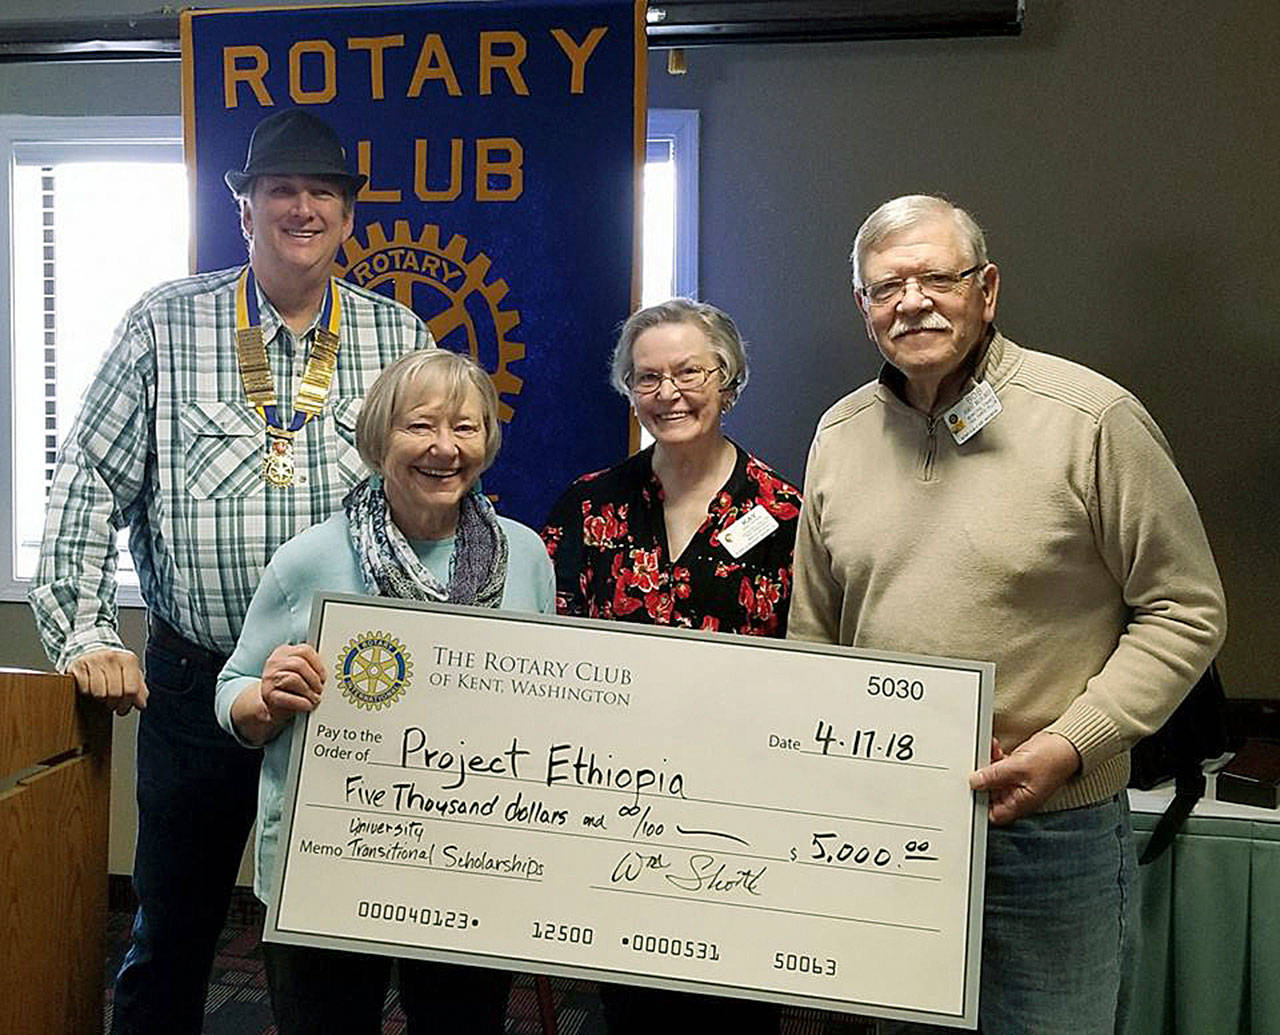 At the presentation are, from left, Rotary Club President Billy Shott; Project Ethiopia spokesperson Lynnda Laurie; Rotarian Kay Cook; and International Committee chair Bob Nachlinger. COURTESY PHOTO